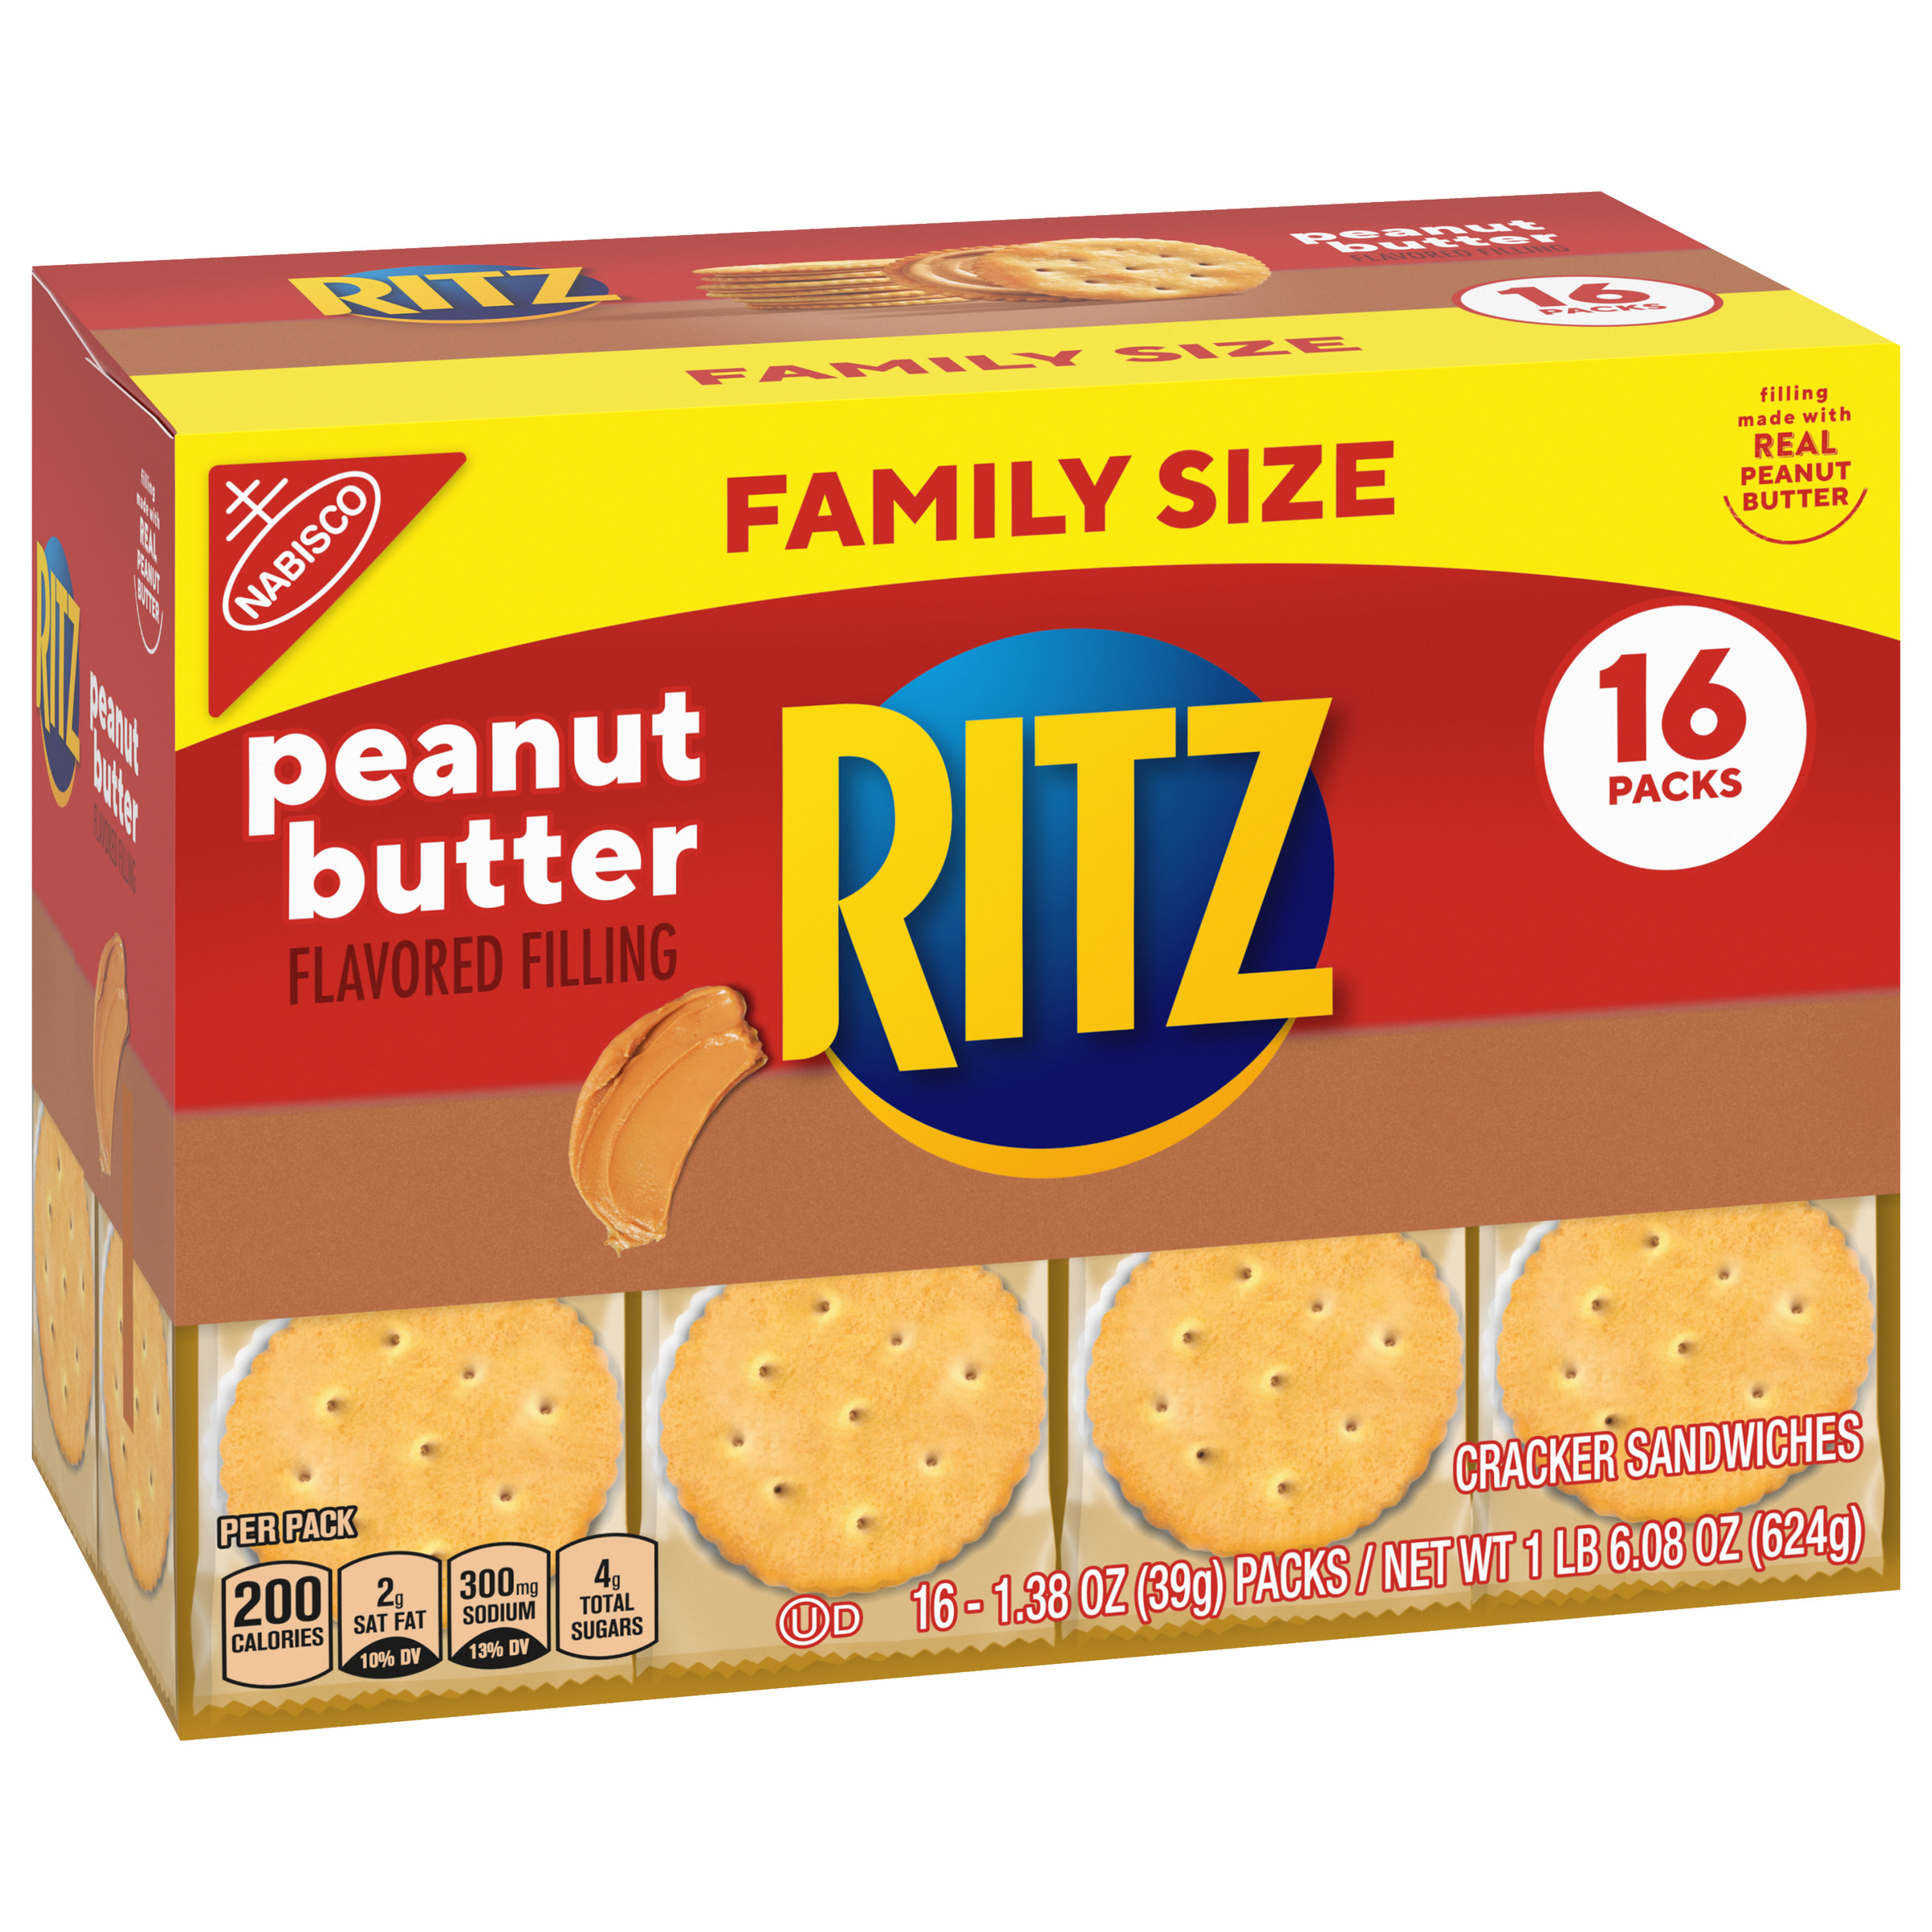 RITZ Peanut Butter Sandwich Crackers, Family Size, 16 - 1.38 oz Packs - image 2 of 13